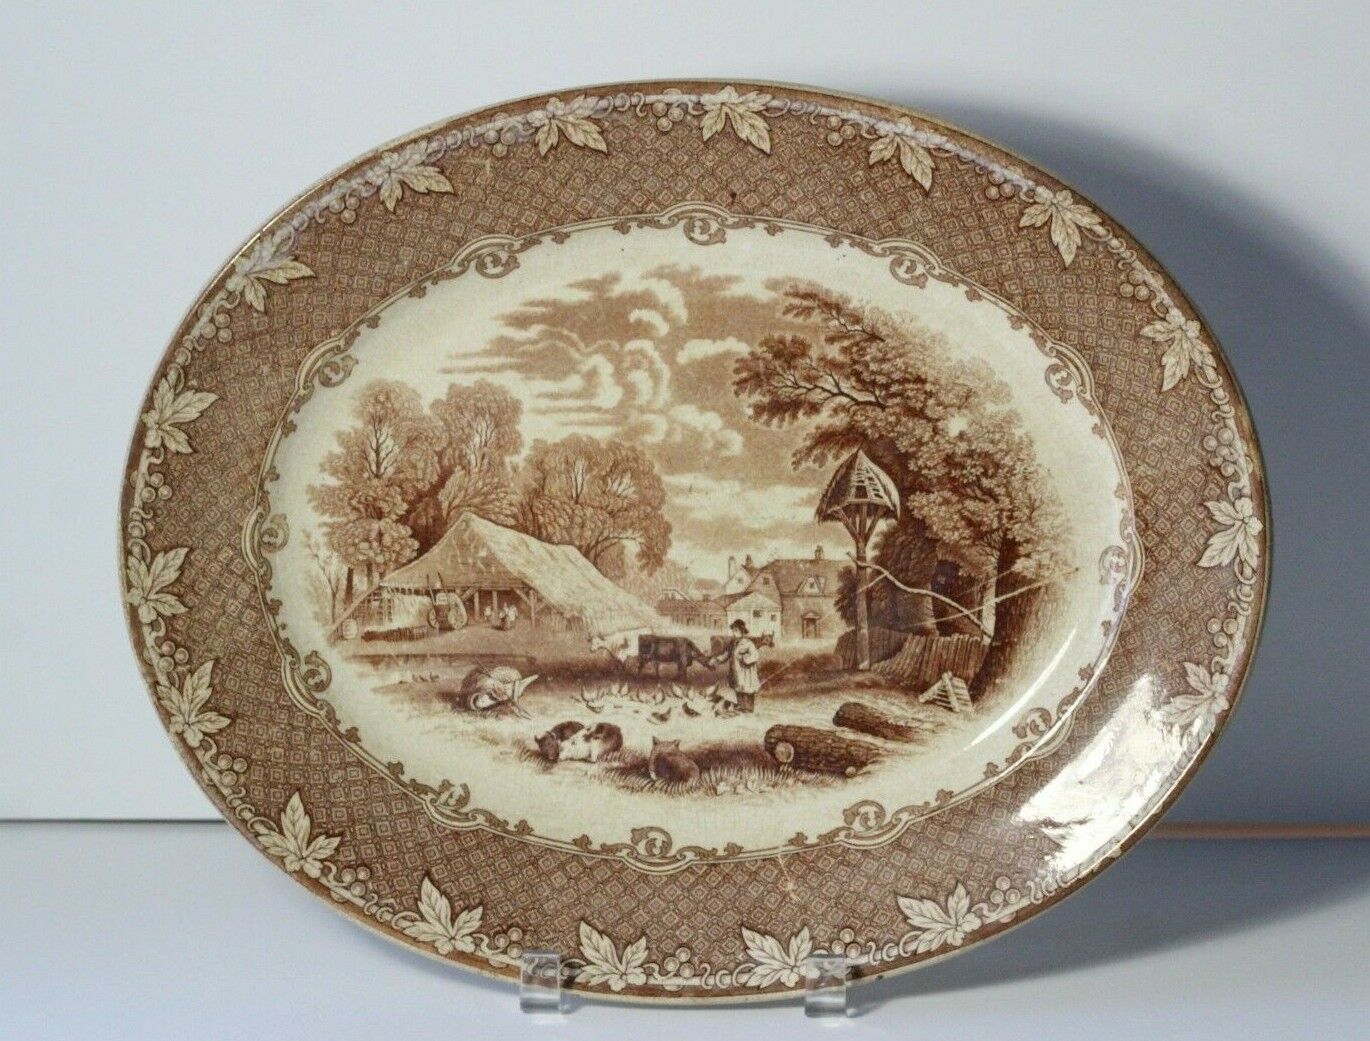 Antique Late 19thC Old Hall E Ware Brown Transferware Ironstone Oval Platter 14 